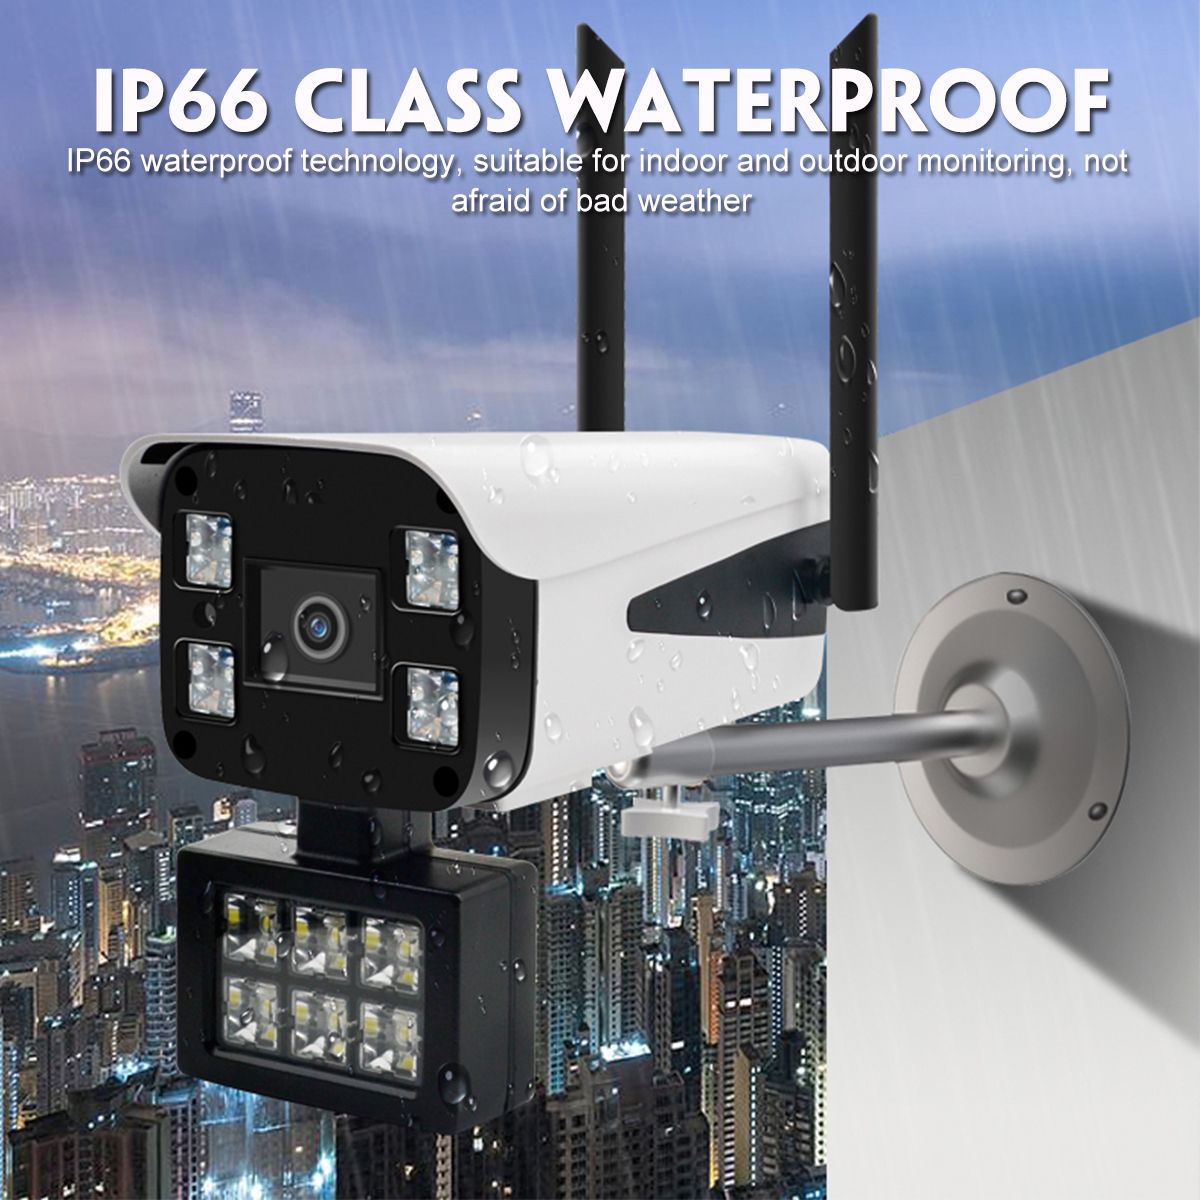 GUUDGO-10LED-1080P-Wireless-Security-IP-Camera-WiFi-Camera-Night-Vision-Full-Color-Outdoor-IP66-Wate-1546404